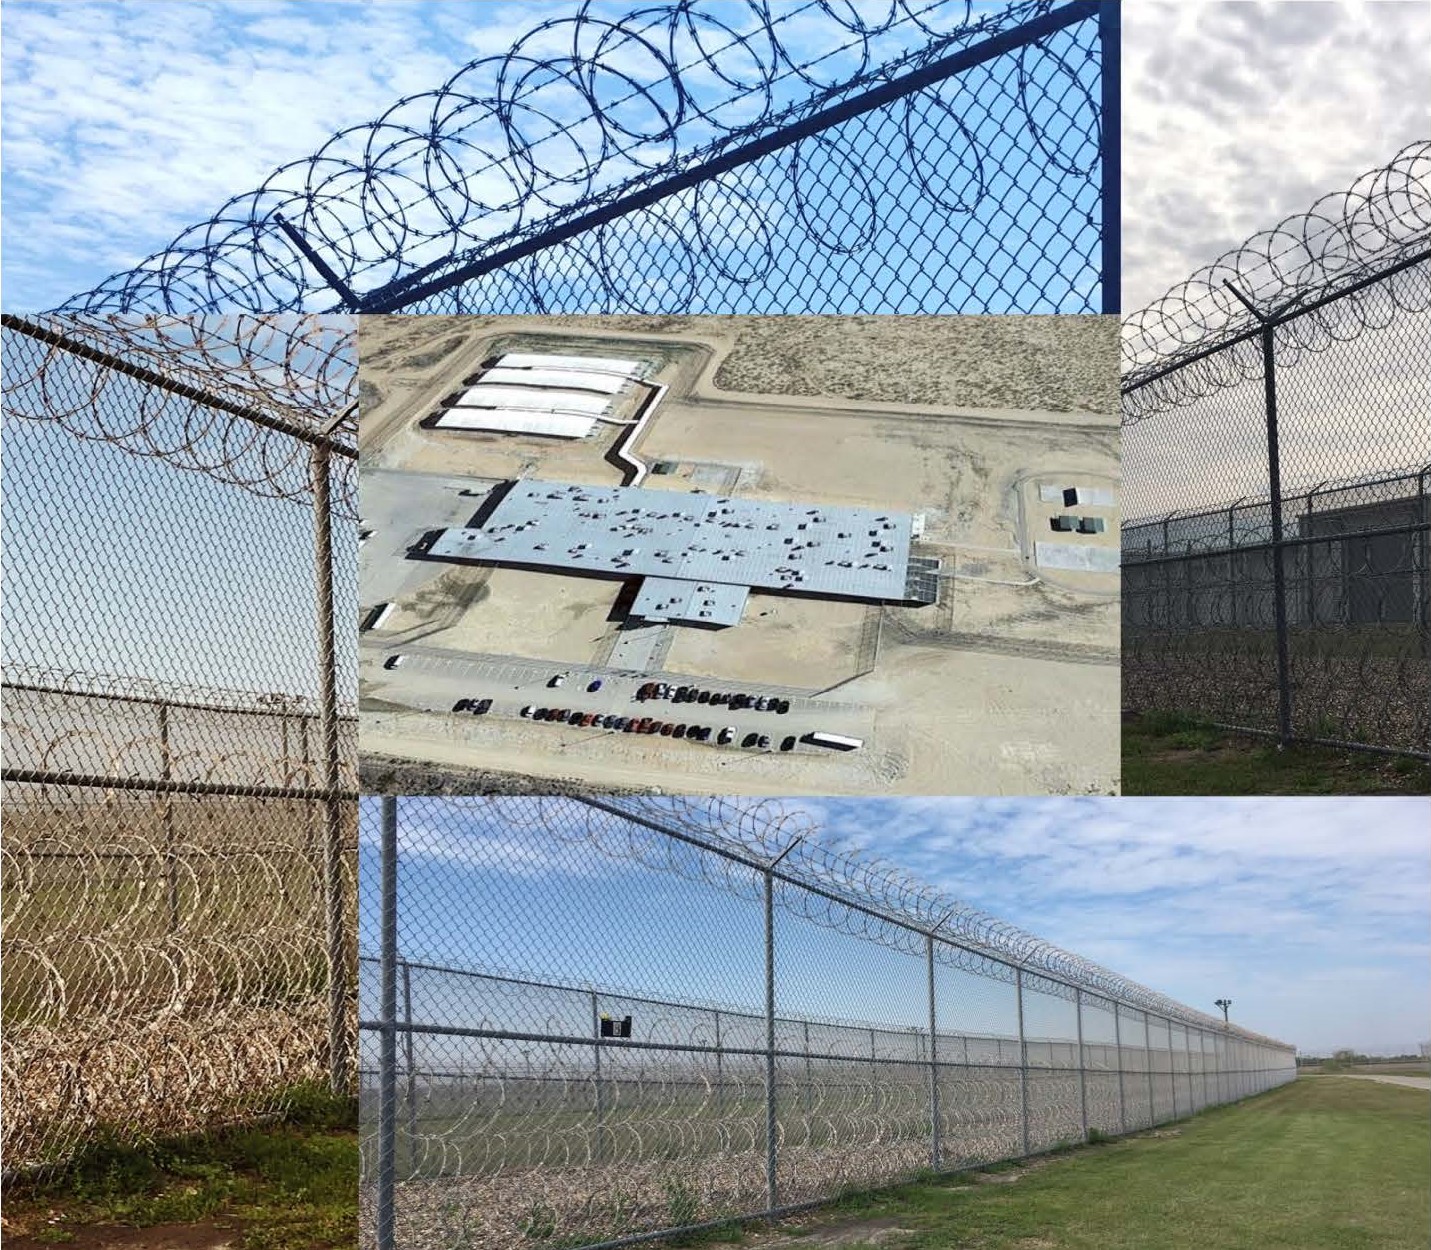 Images of a detention center with barbed wire